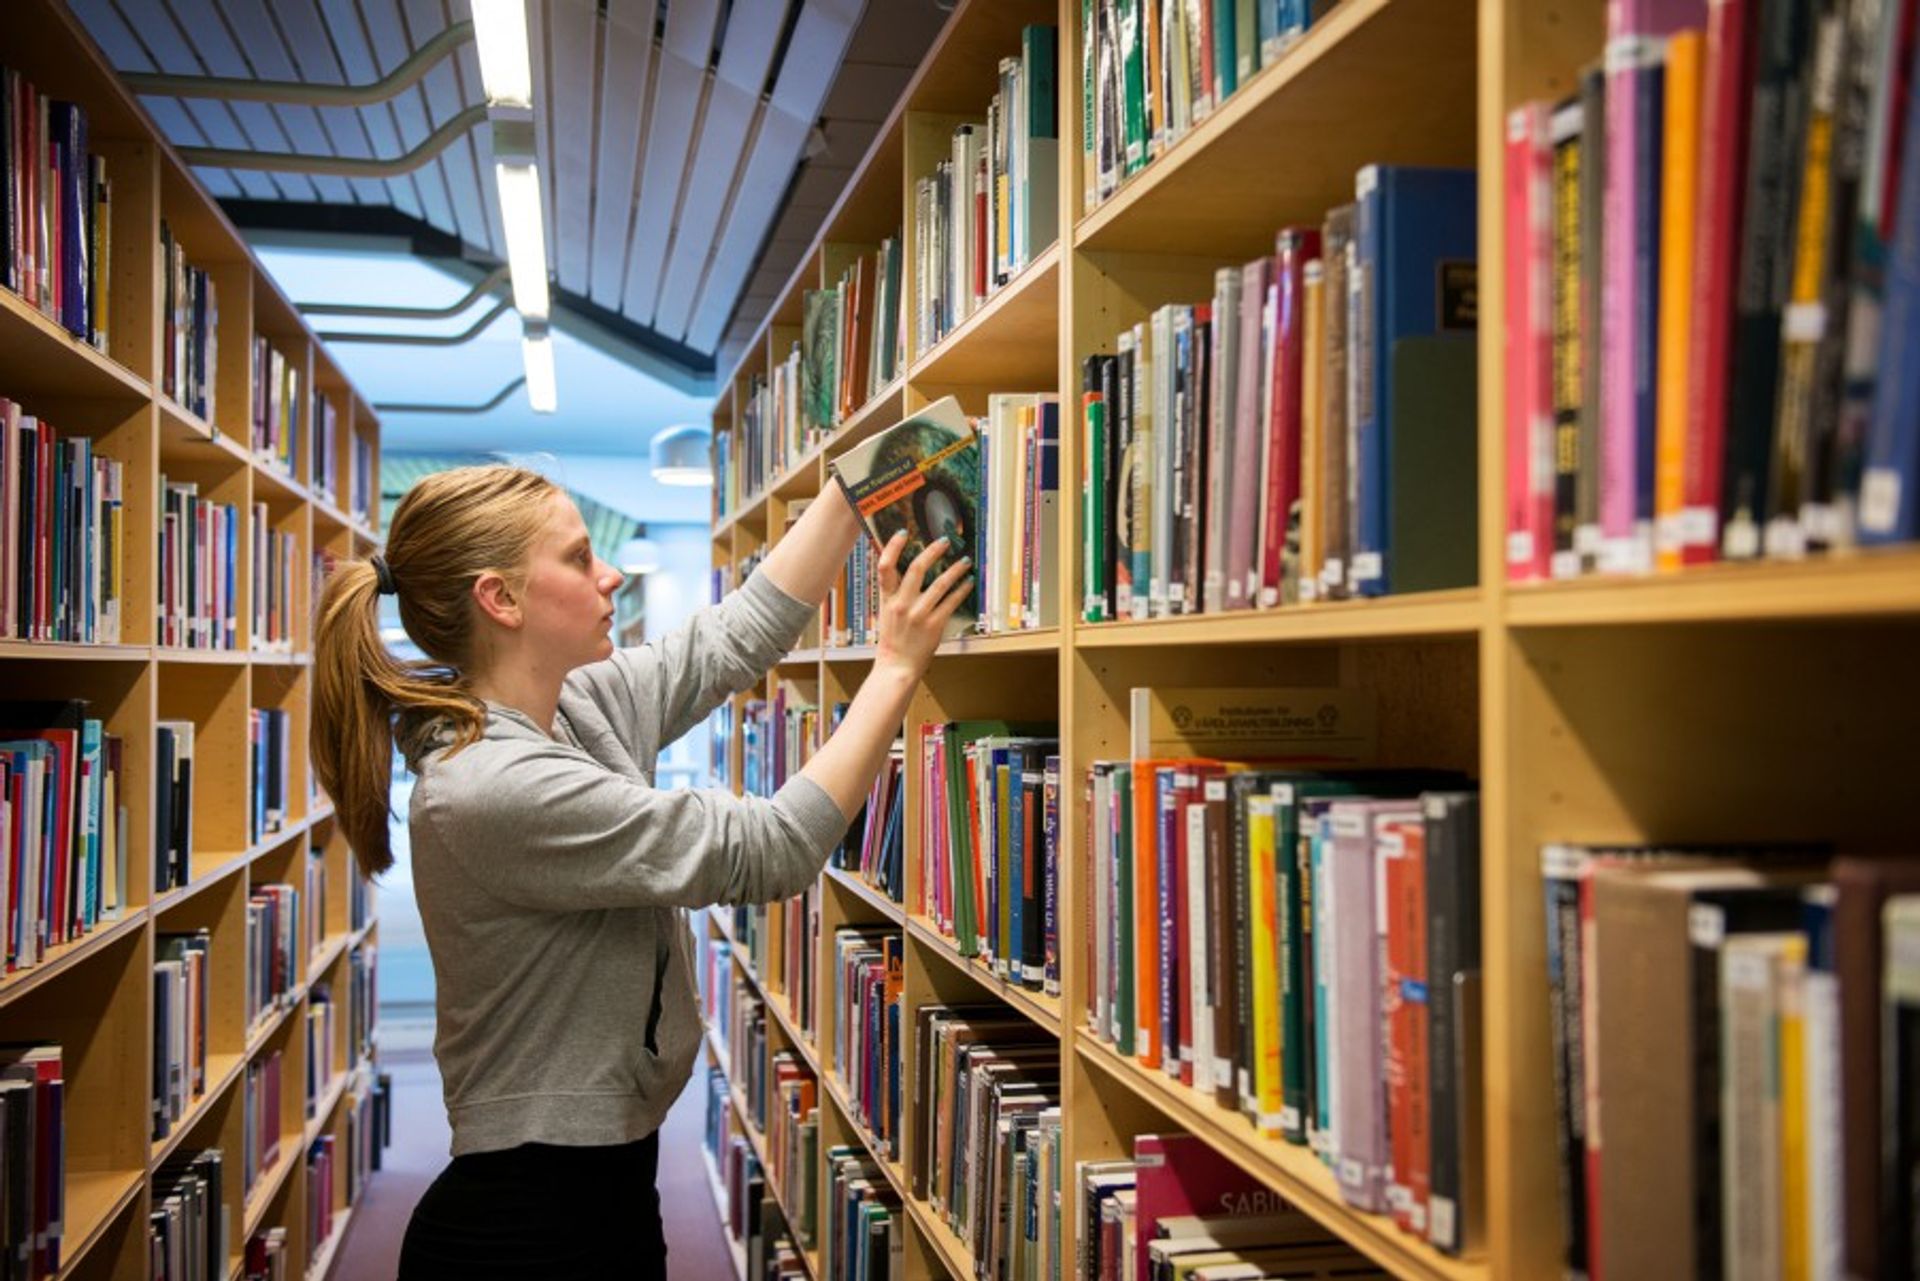 Student taking a book out of a library shelf.